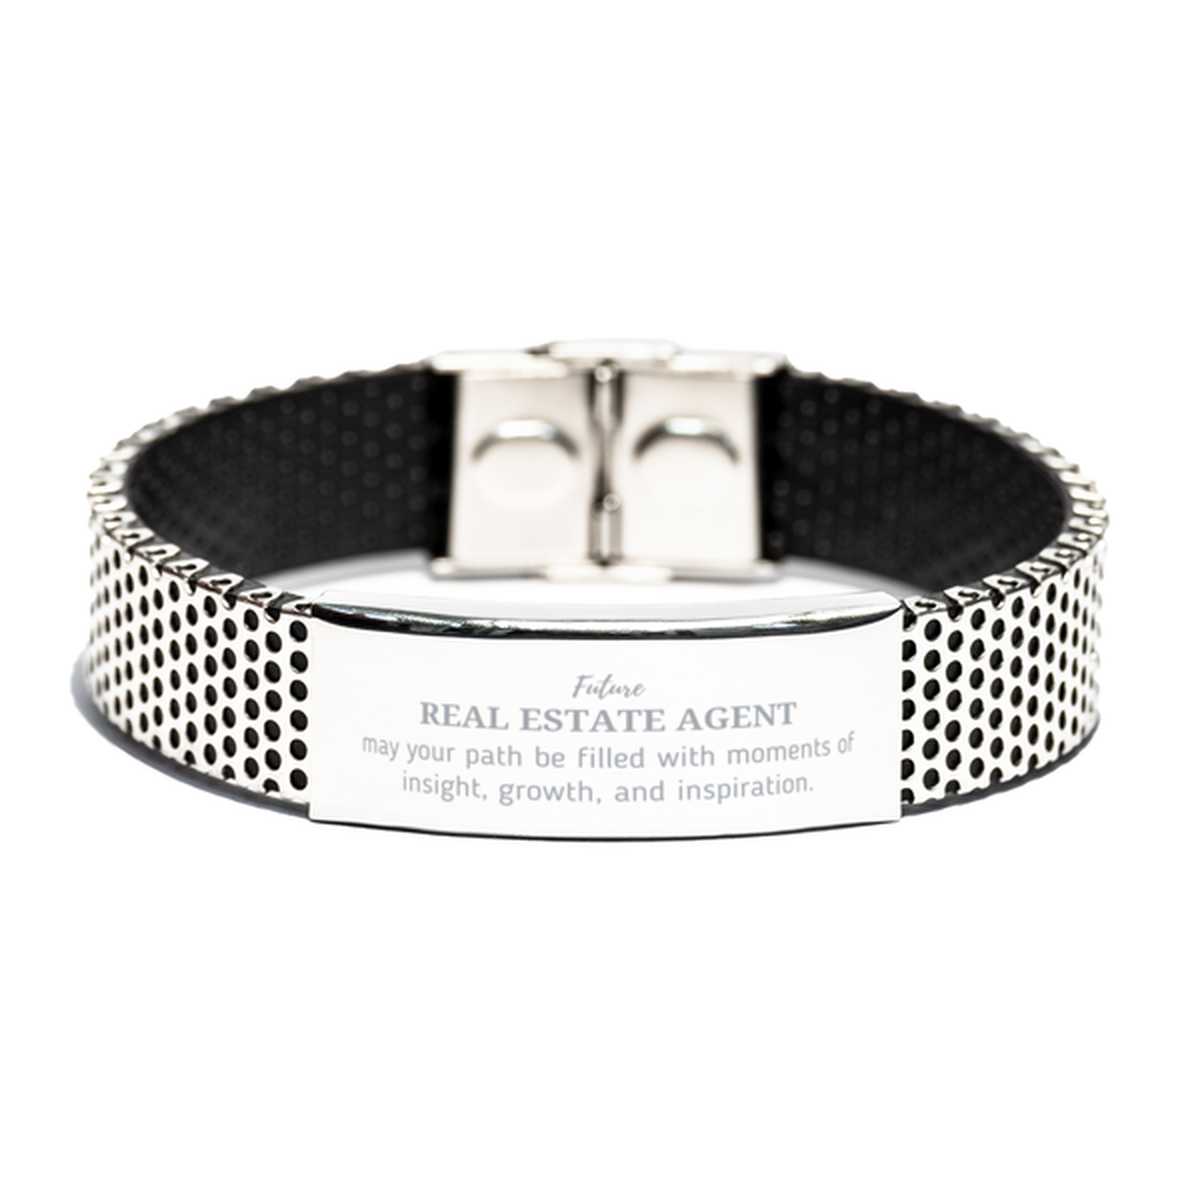 Future Real Estate Agent Gifts, May your path be filled with moments of insight, Graduation Gifts for New Real Estate Agent, Christmas Unique Stainless Steel Bracelet For Men, Women, Friends